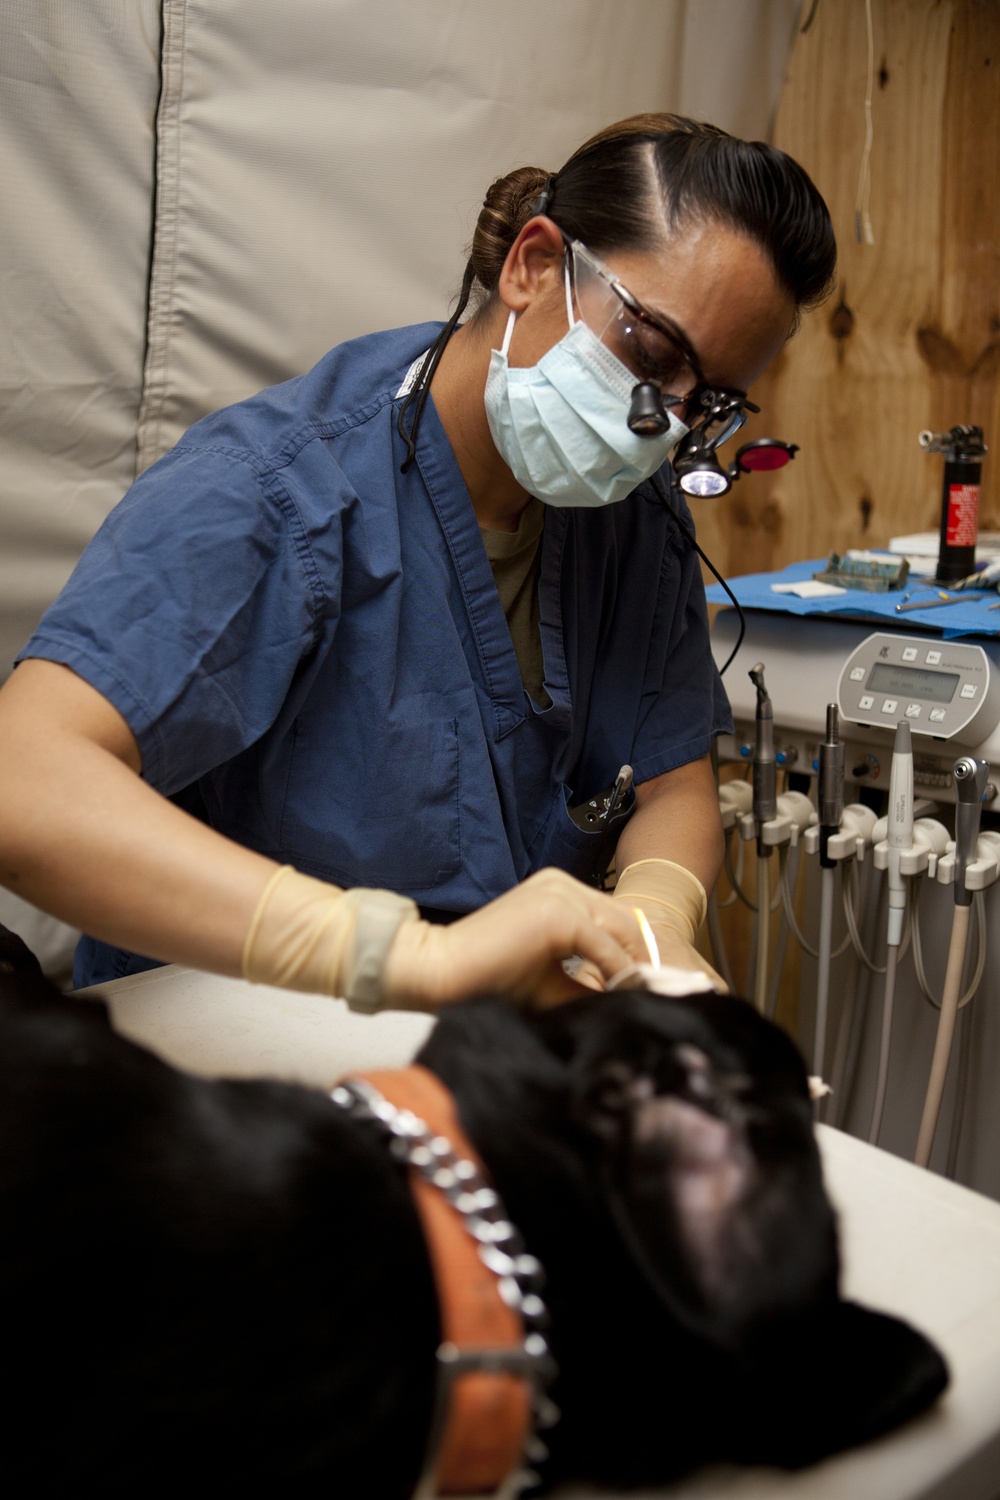 Dental Detachment Performs Root Canal on K-9s